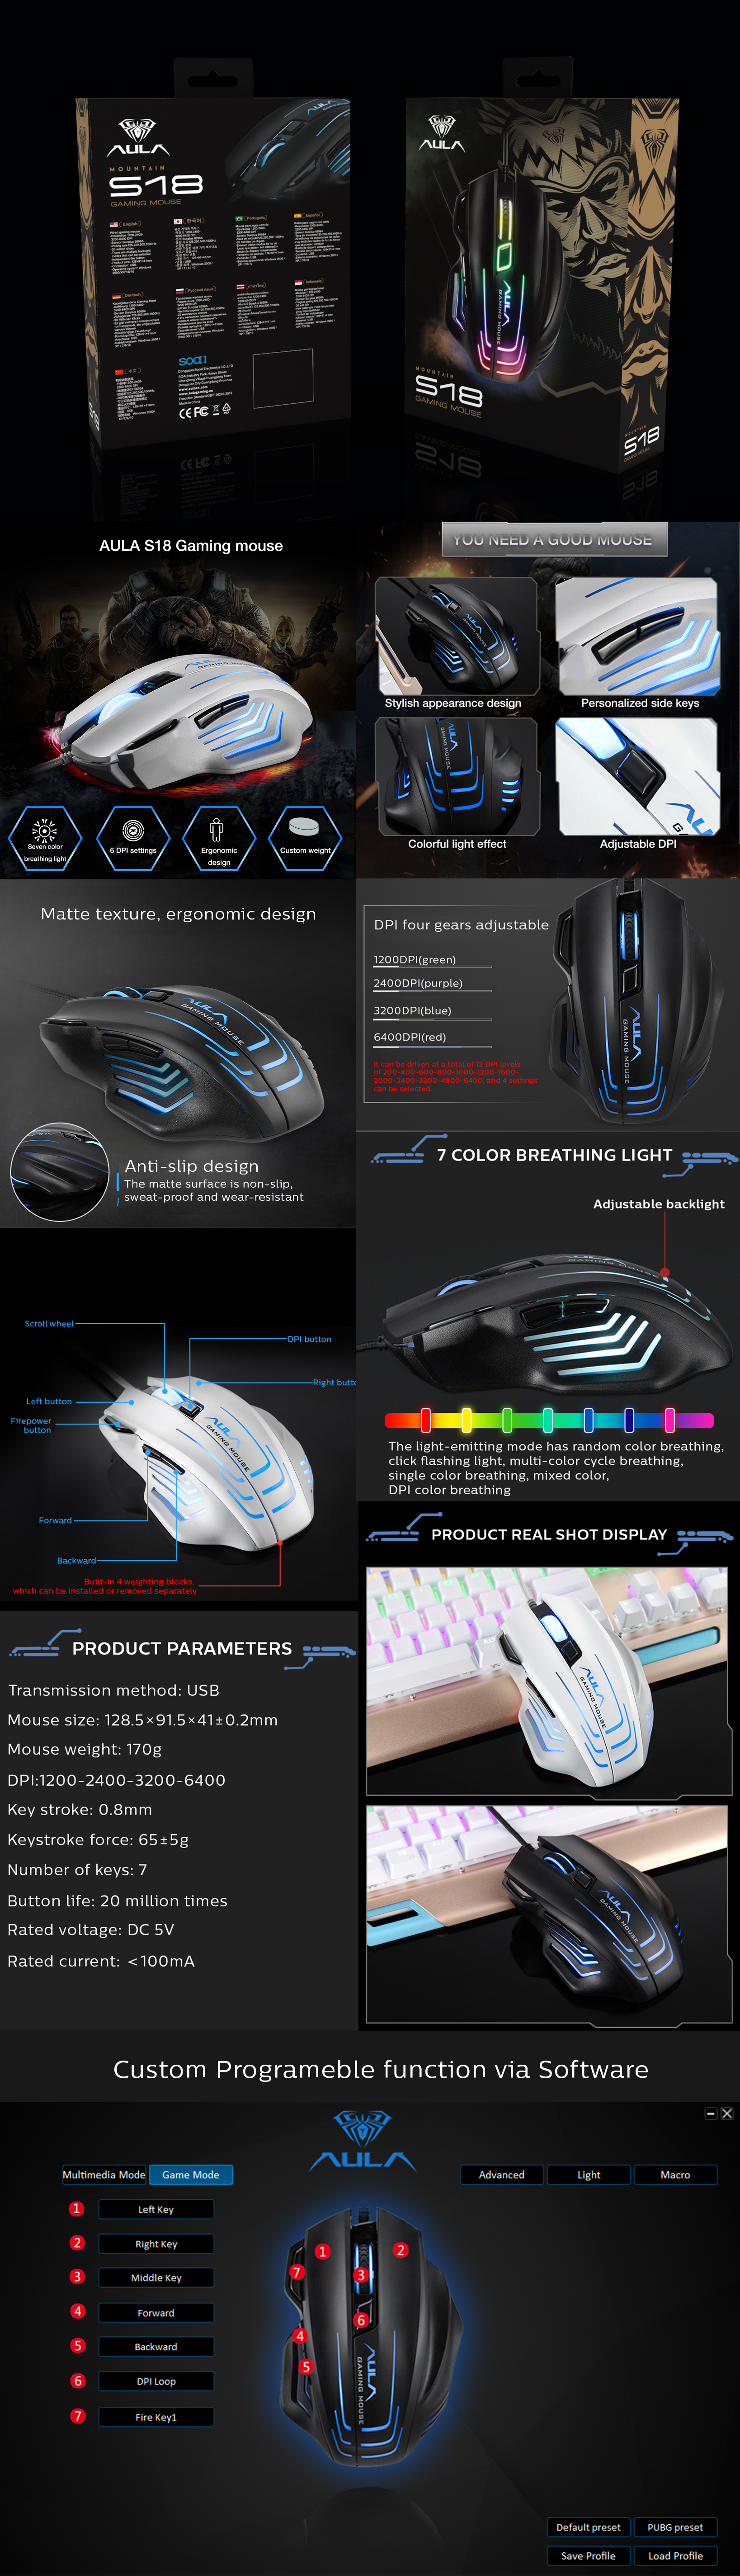 AULA S18 Wired mouse with 7 Programmable Buttons,Adjustable 6400DPI for Windows PC Gamers(图1)